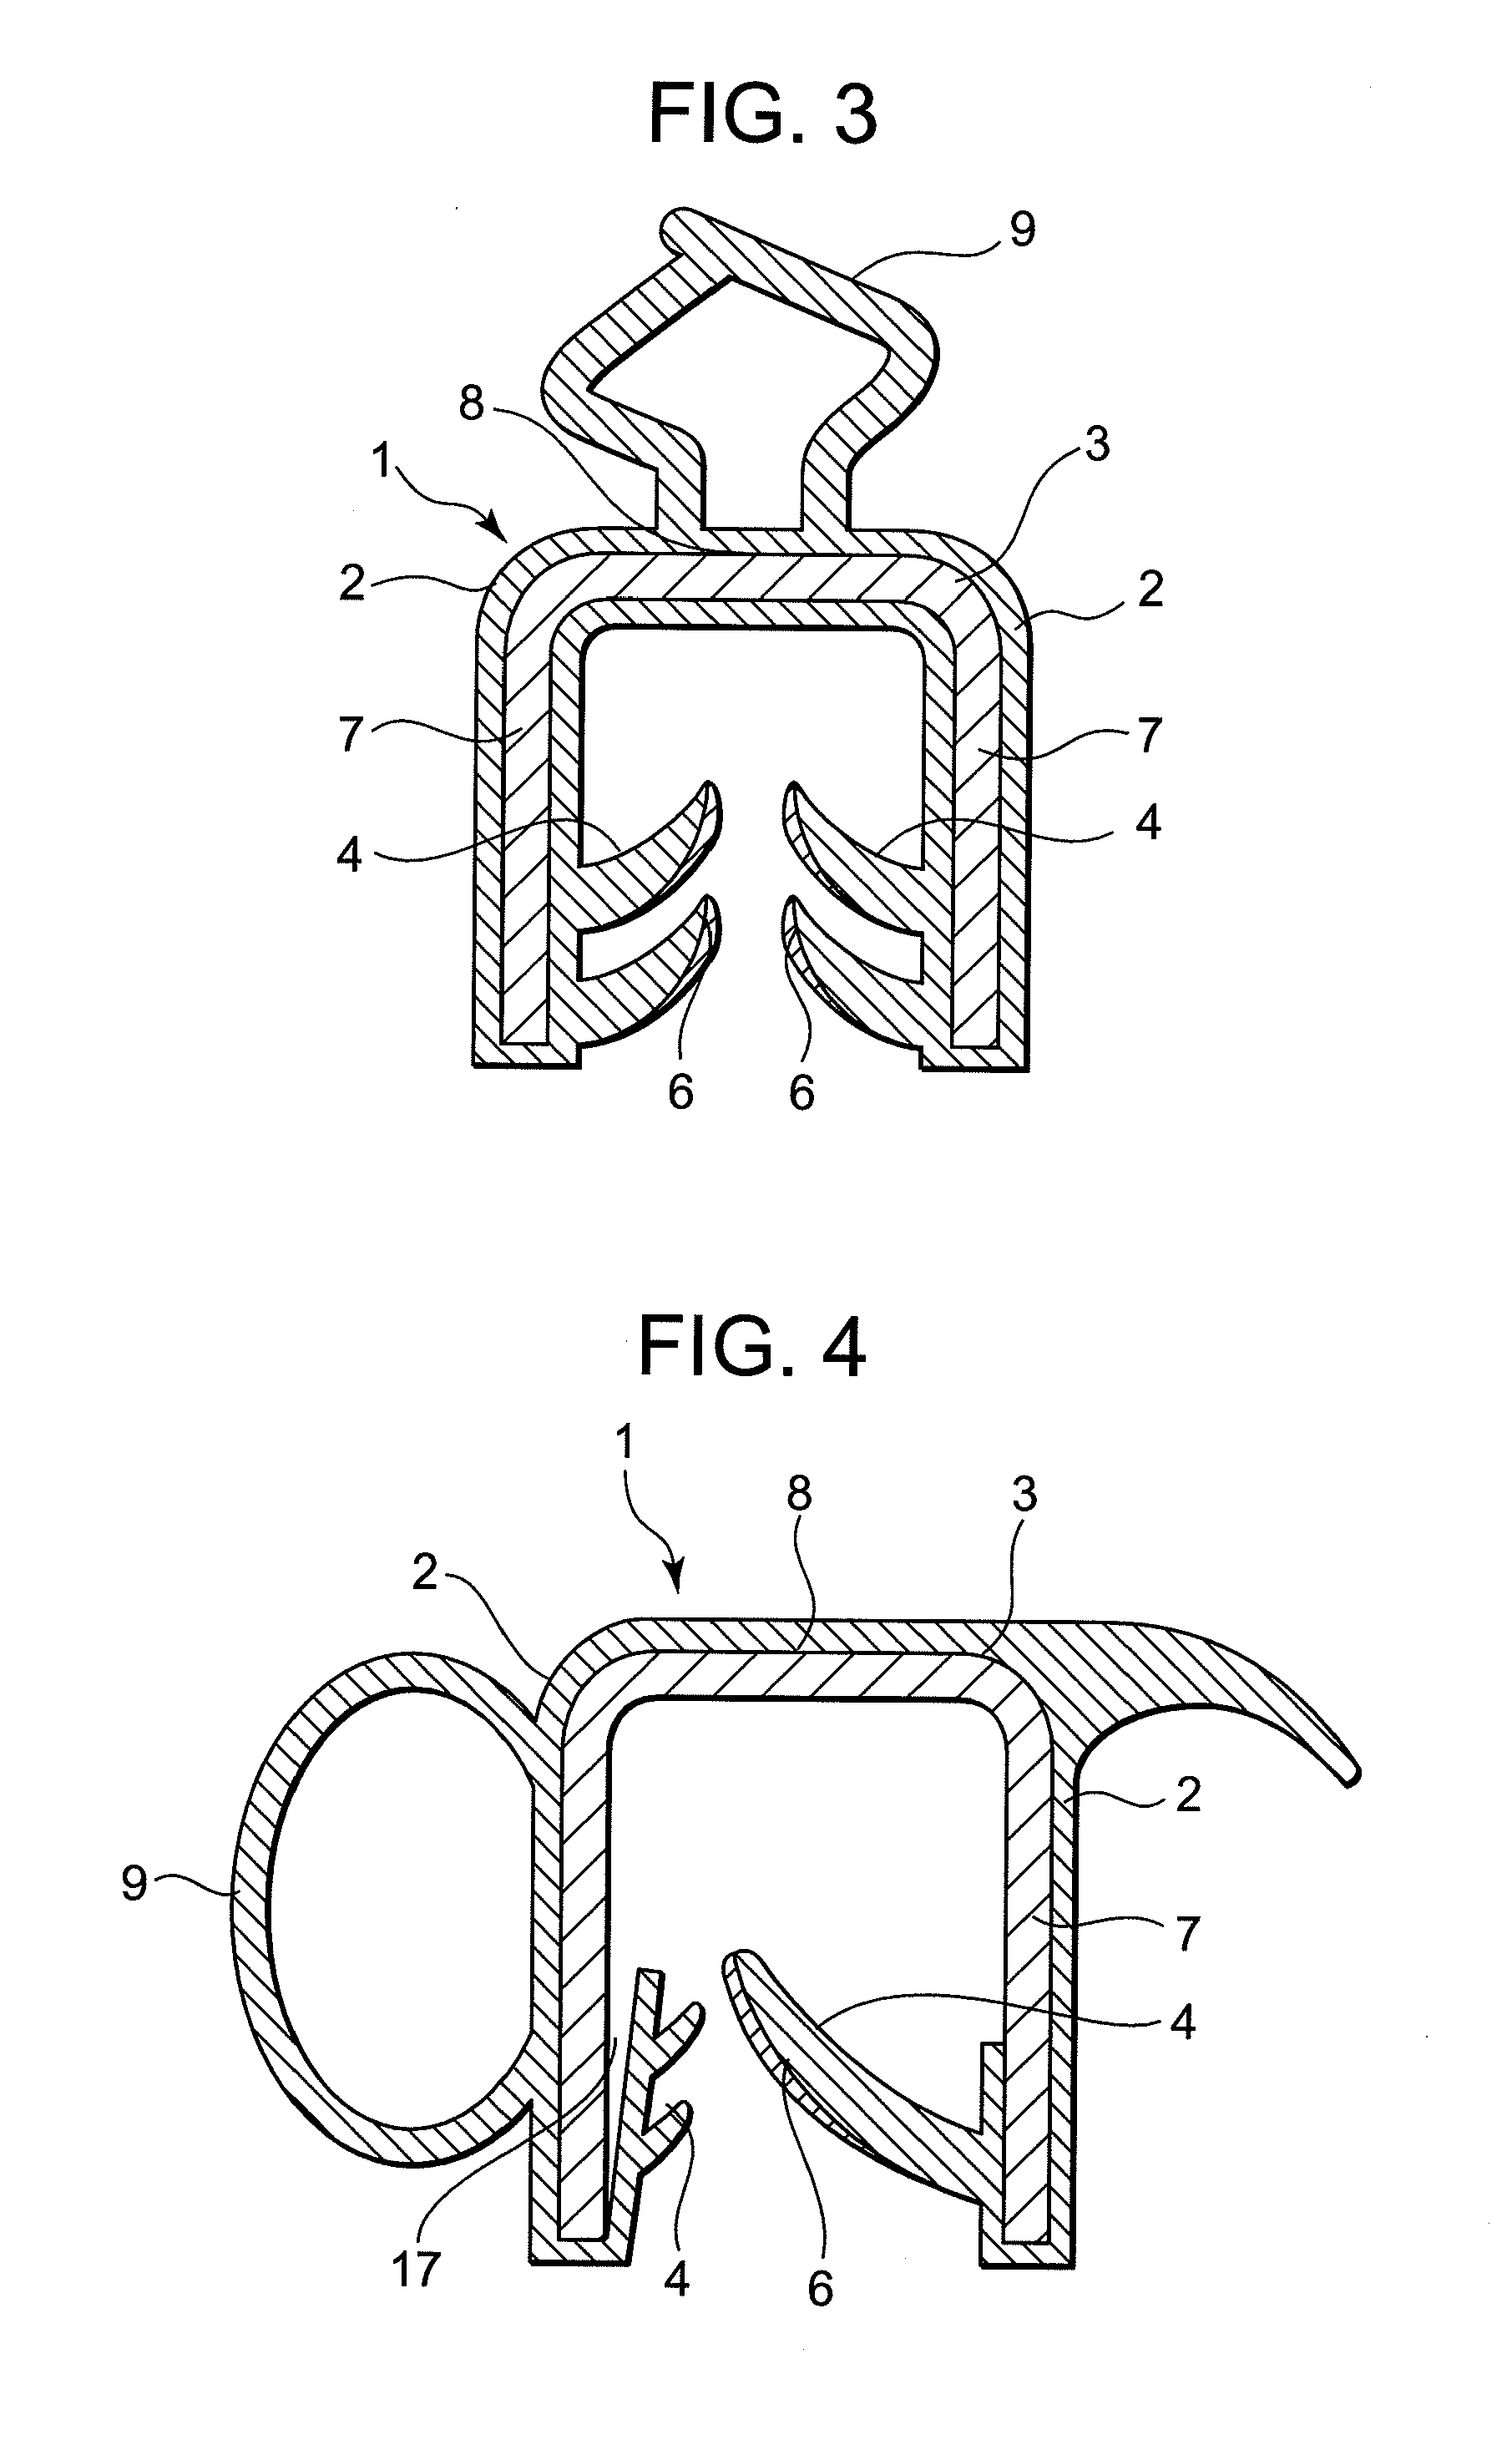 Extrusion molded product having core material